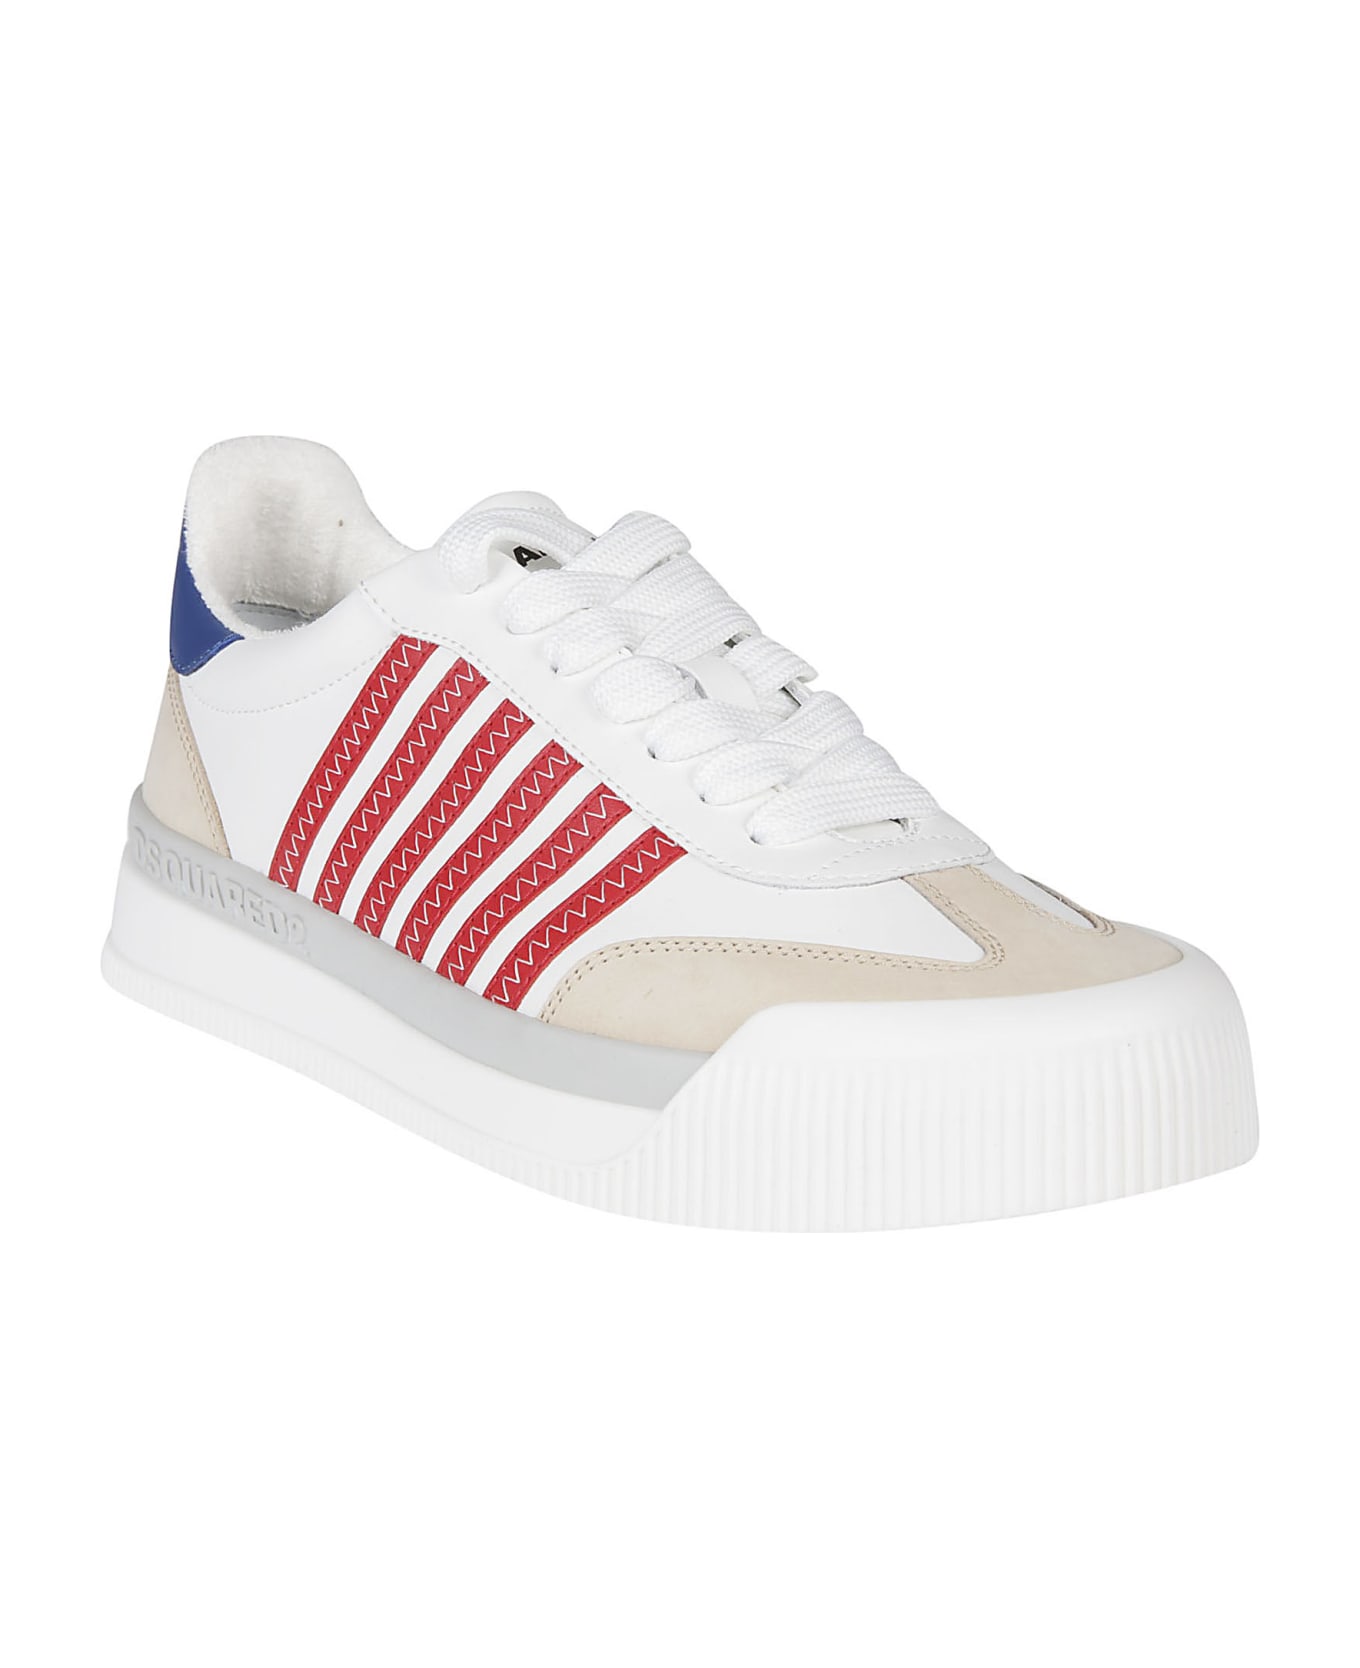 Dsquared2 New Jersey Lace-up Low Top Sneakers - Bianco/rosso/blu